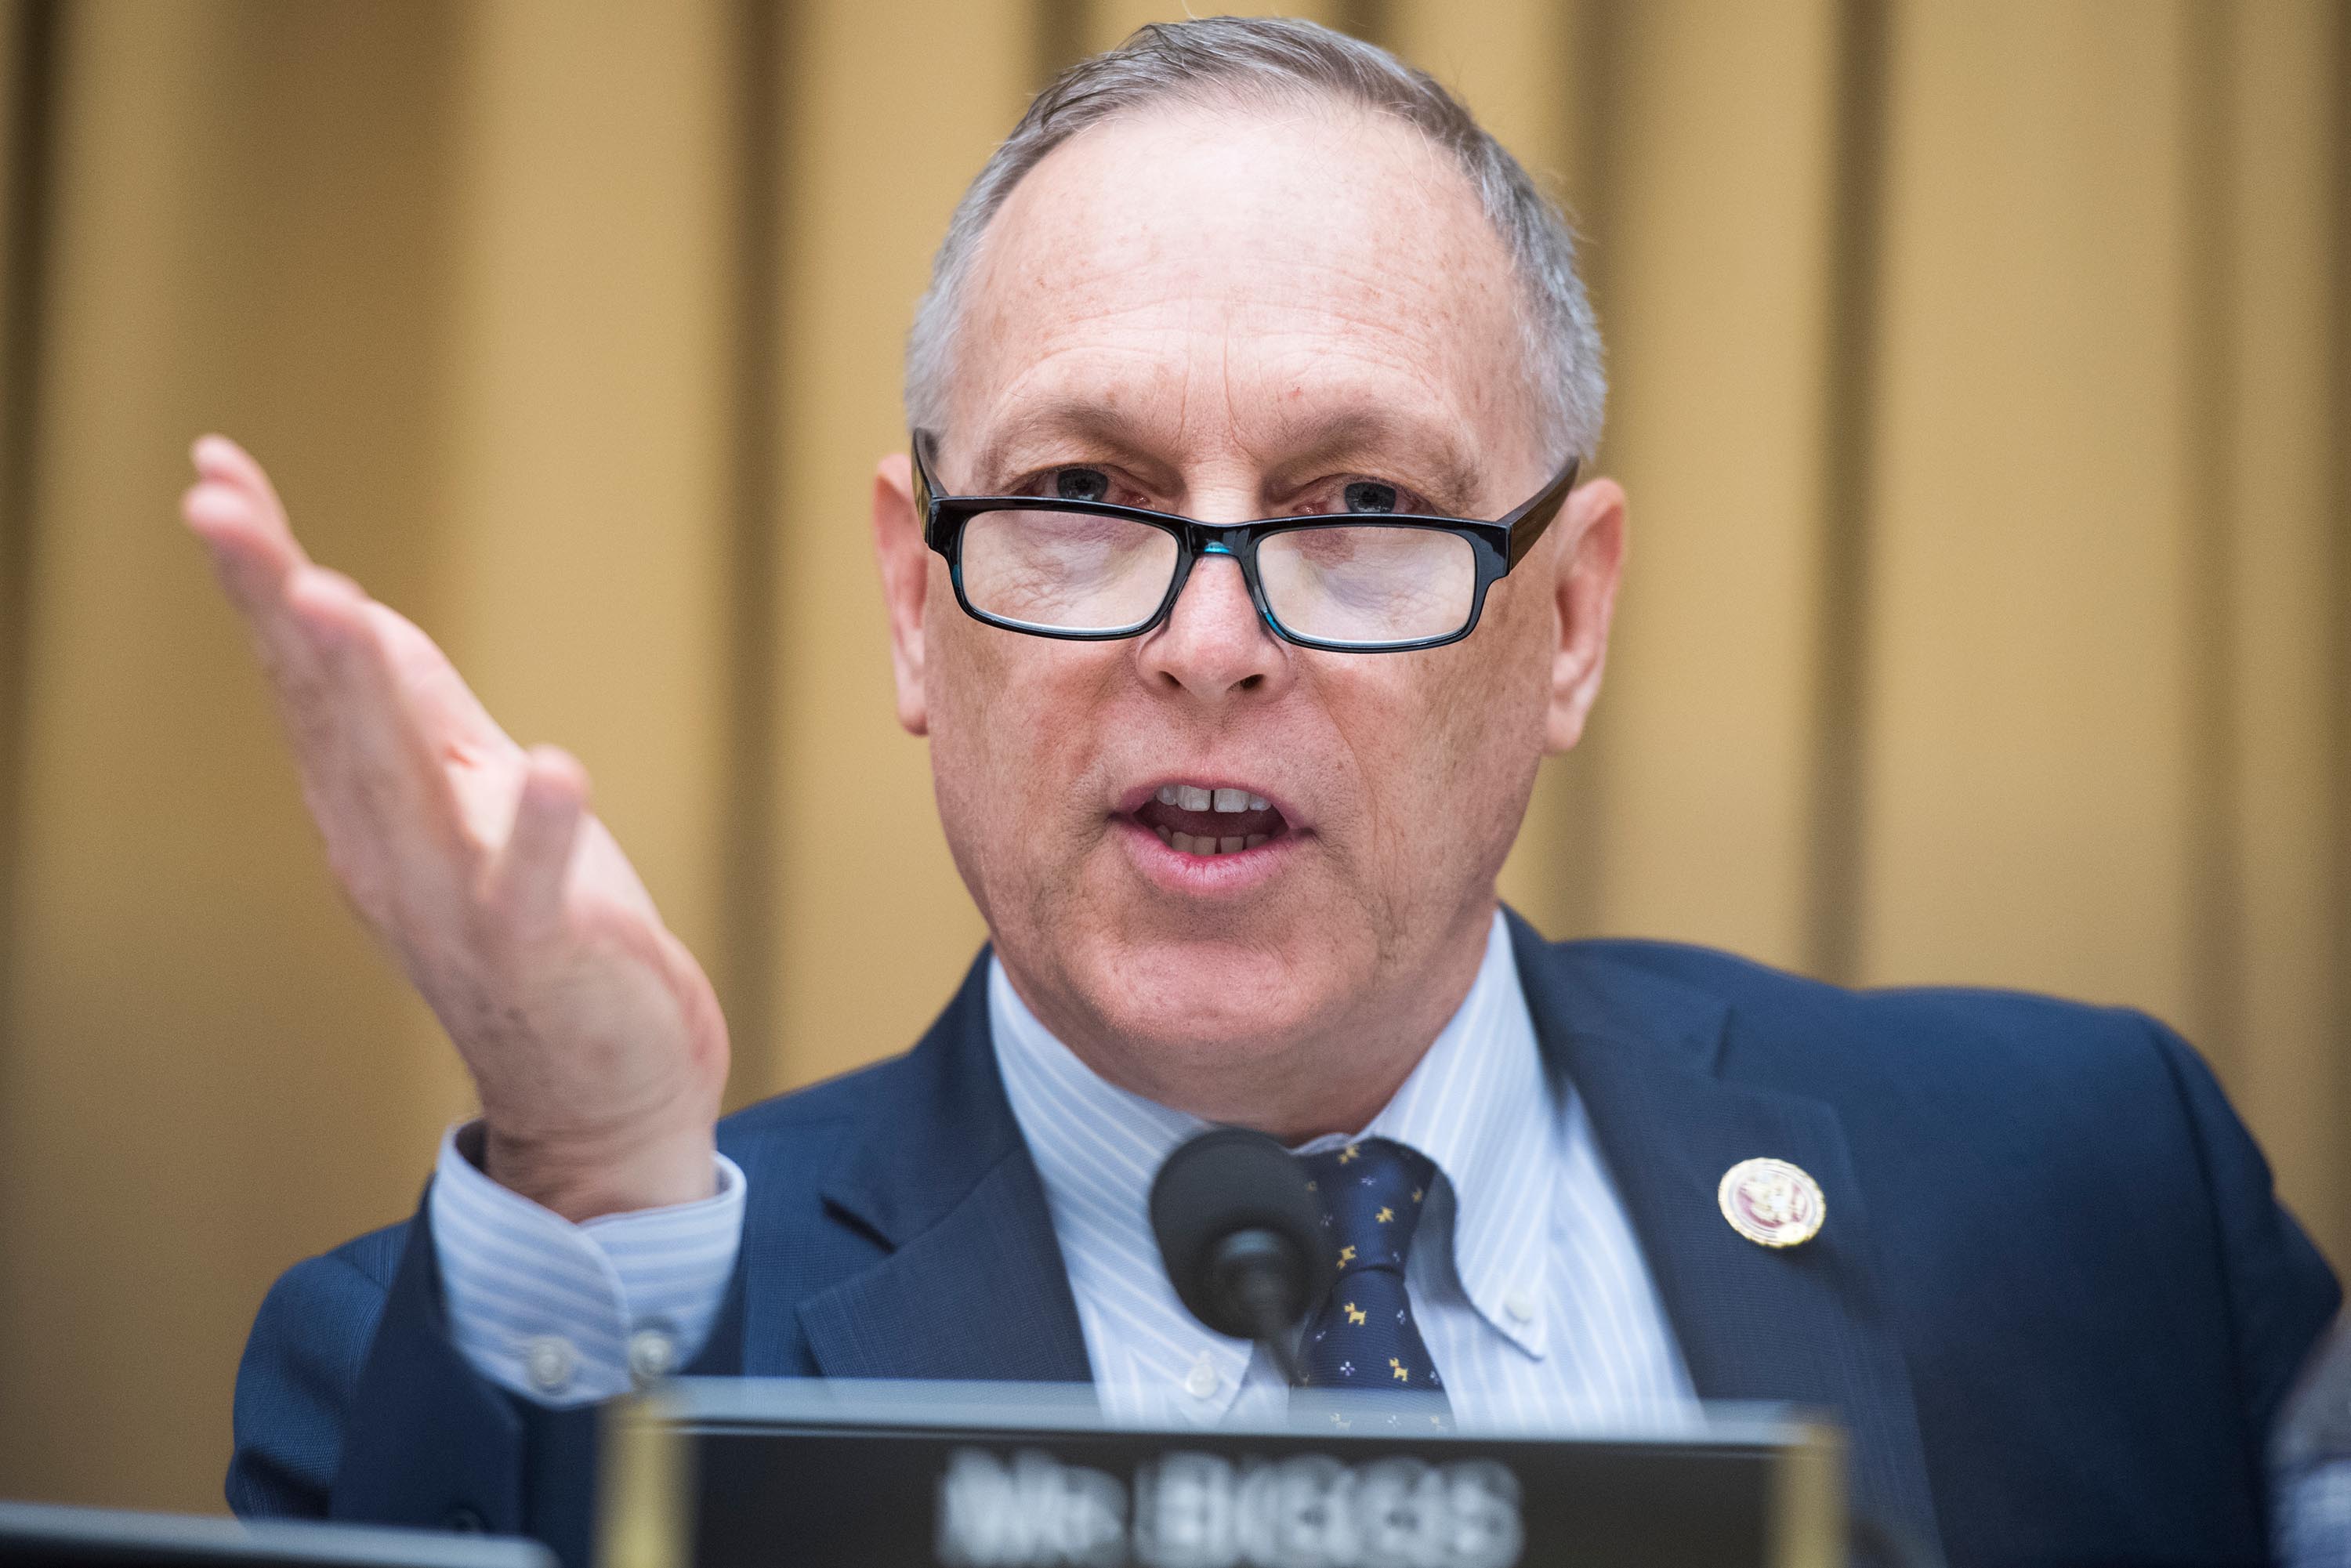 Rep. Andy Biggs attends a hearing in Rayburn Building in September 2019 in Washington.